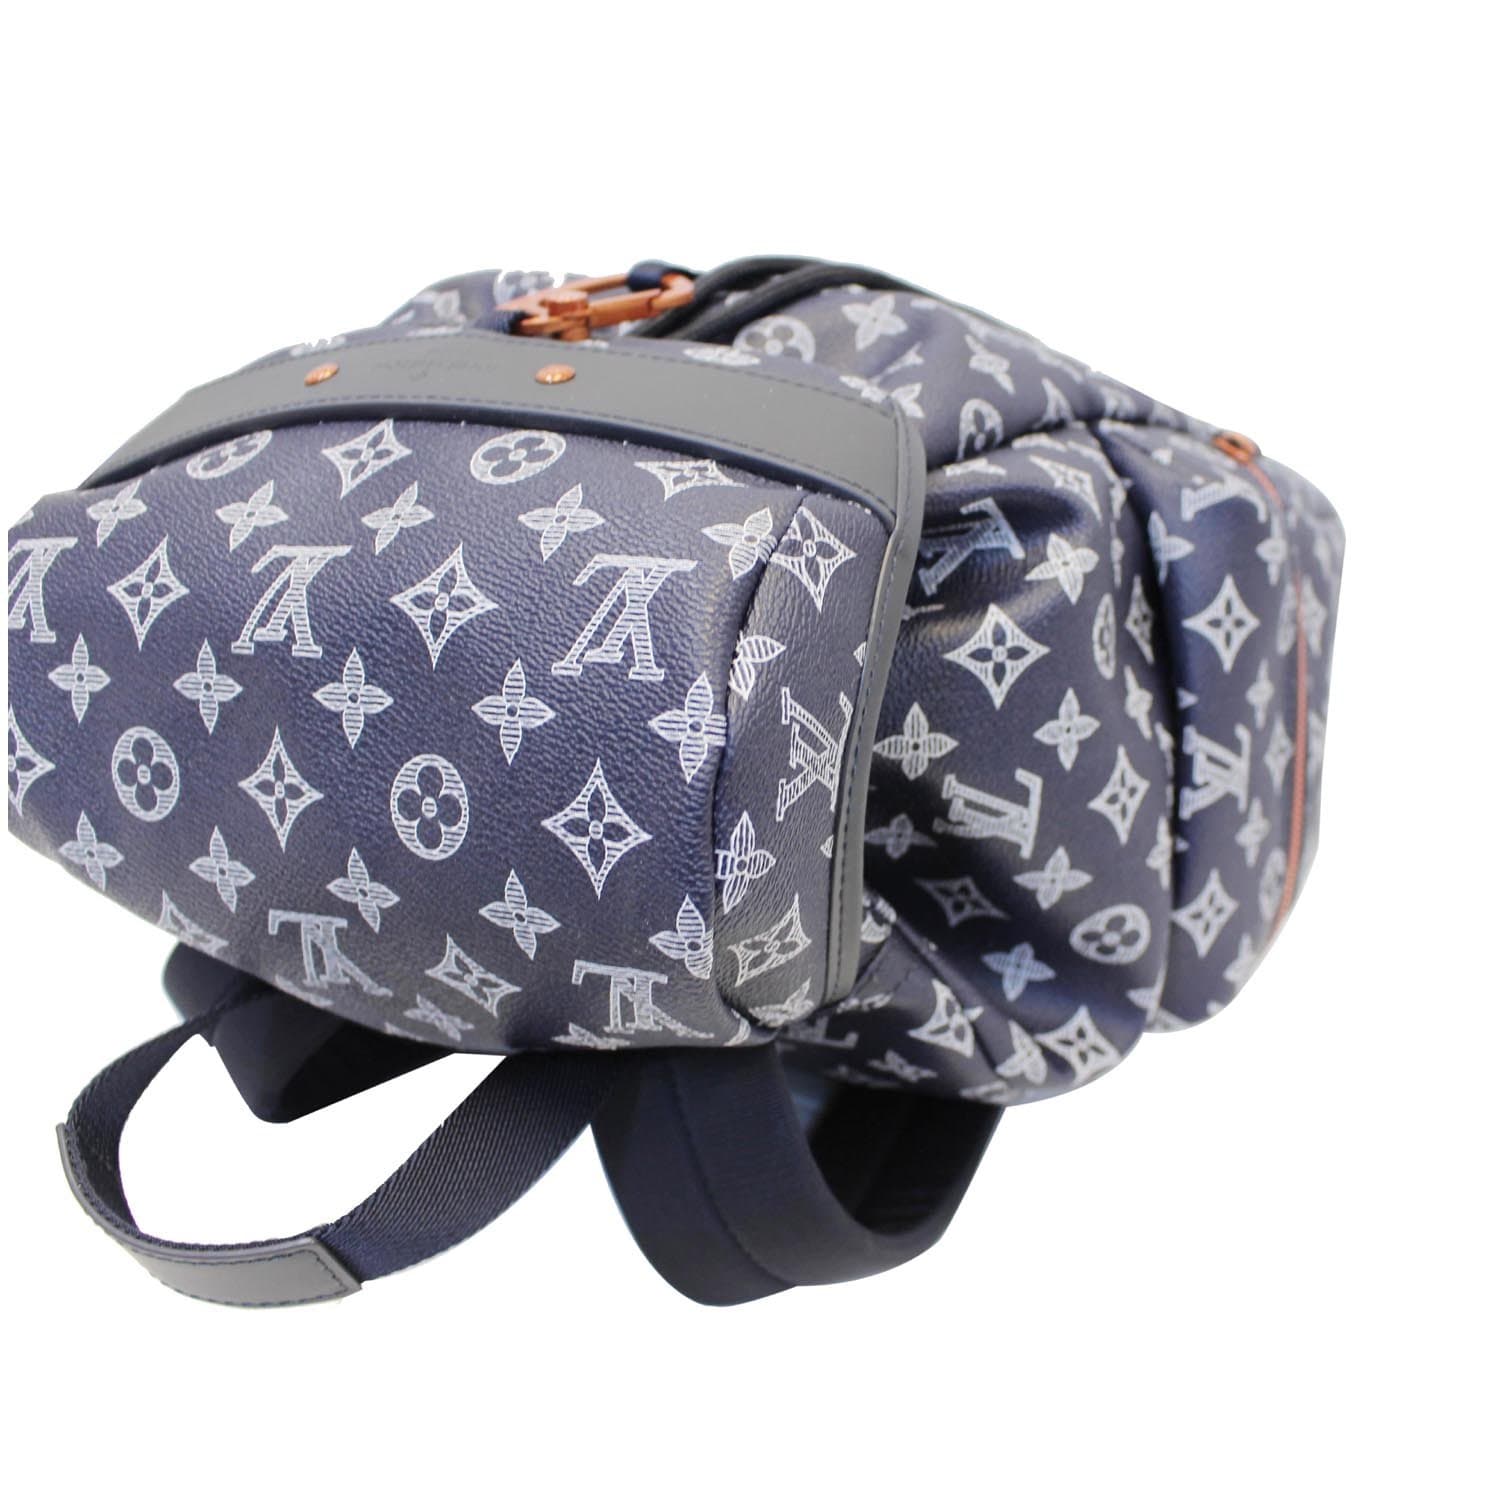 Discovery Backpack Monogram Other - Bags